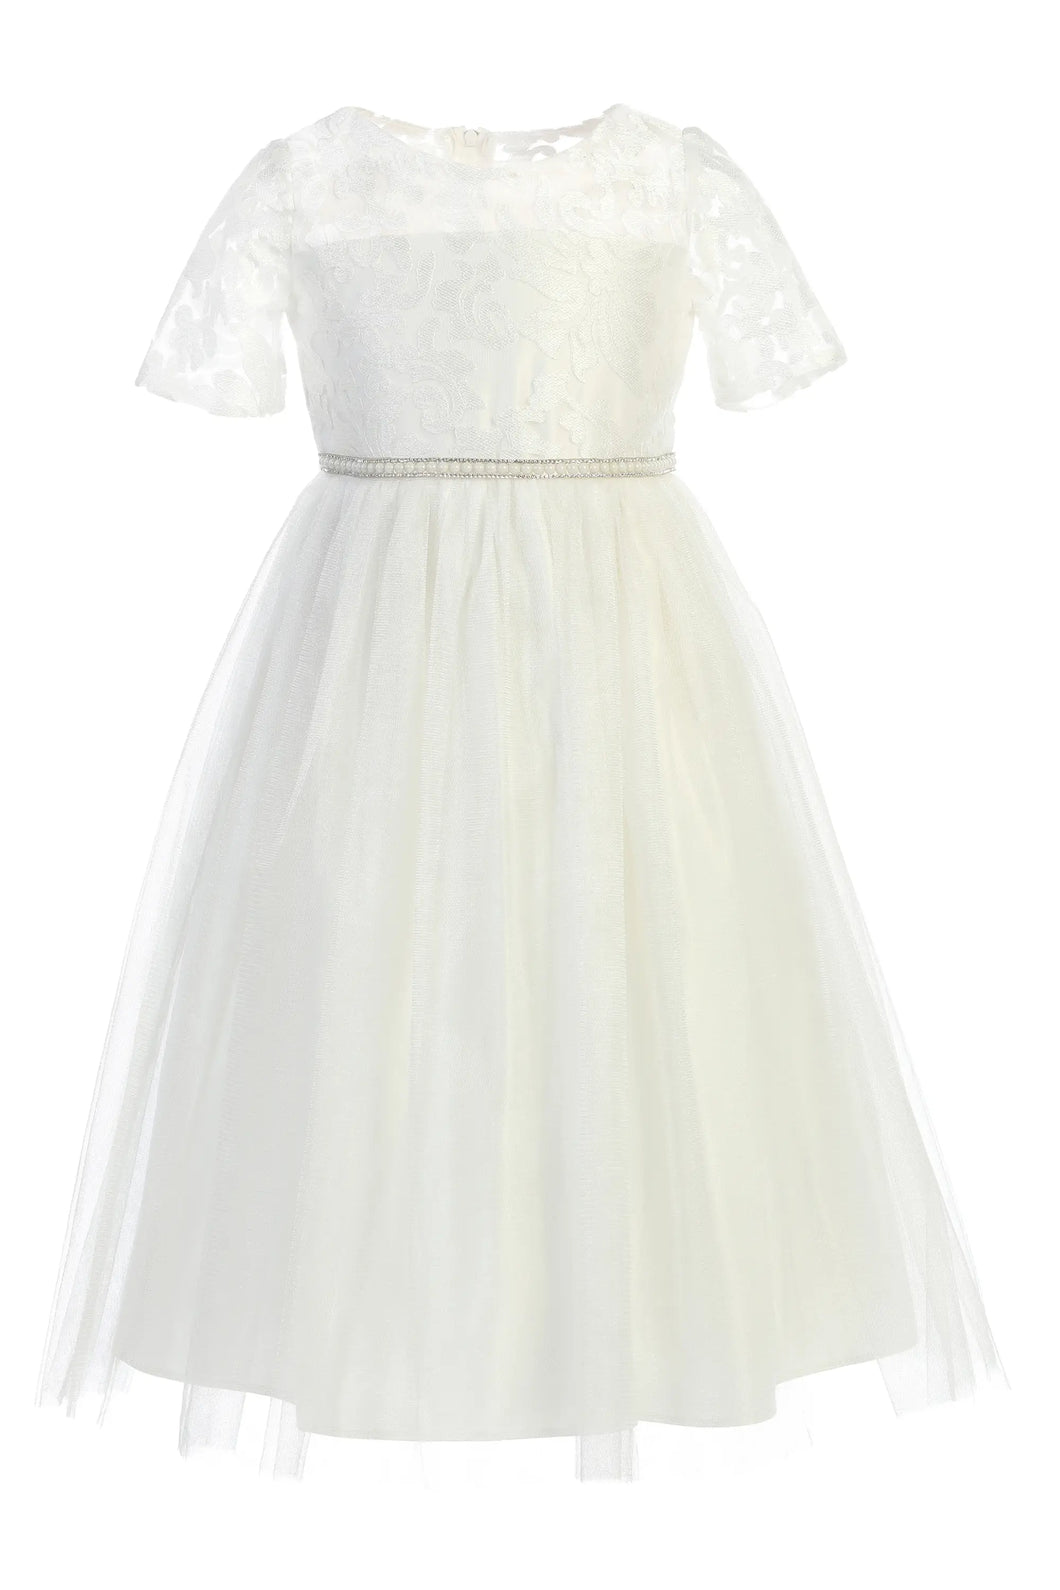 Sweet Kids Off White Luxe Emb Lace w/ Satin & Crystal Tulle